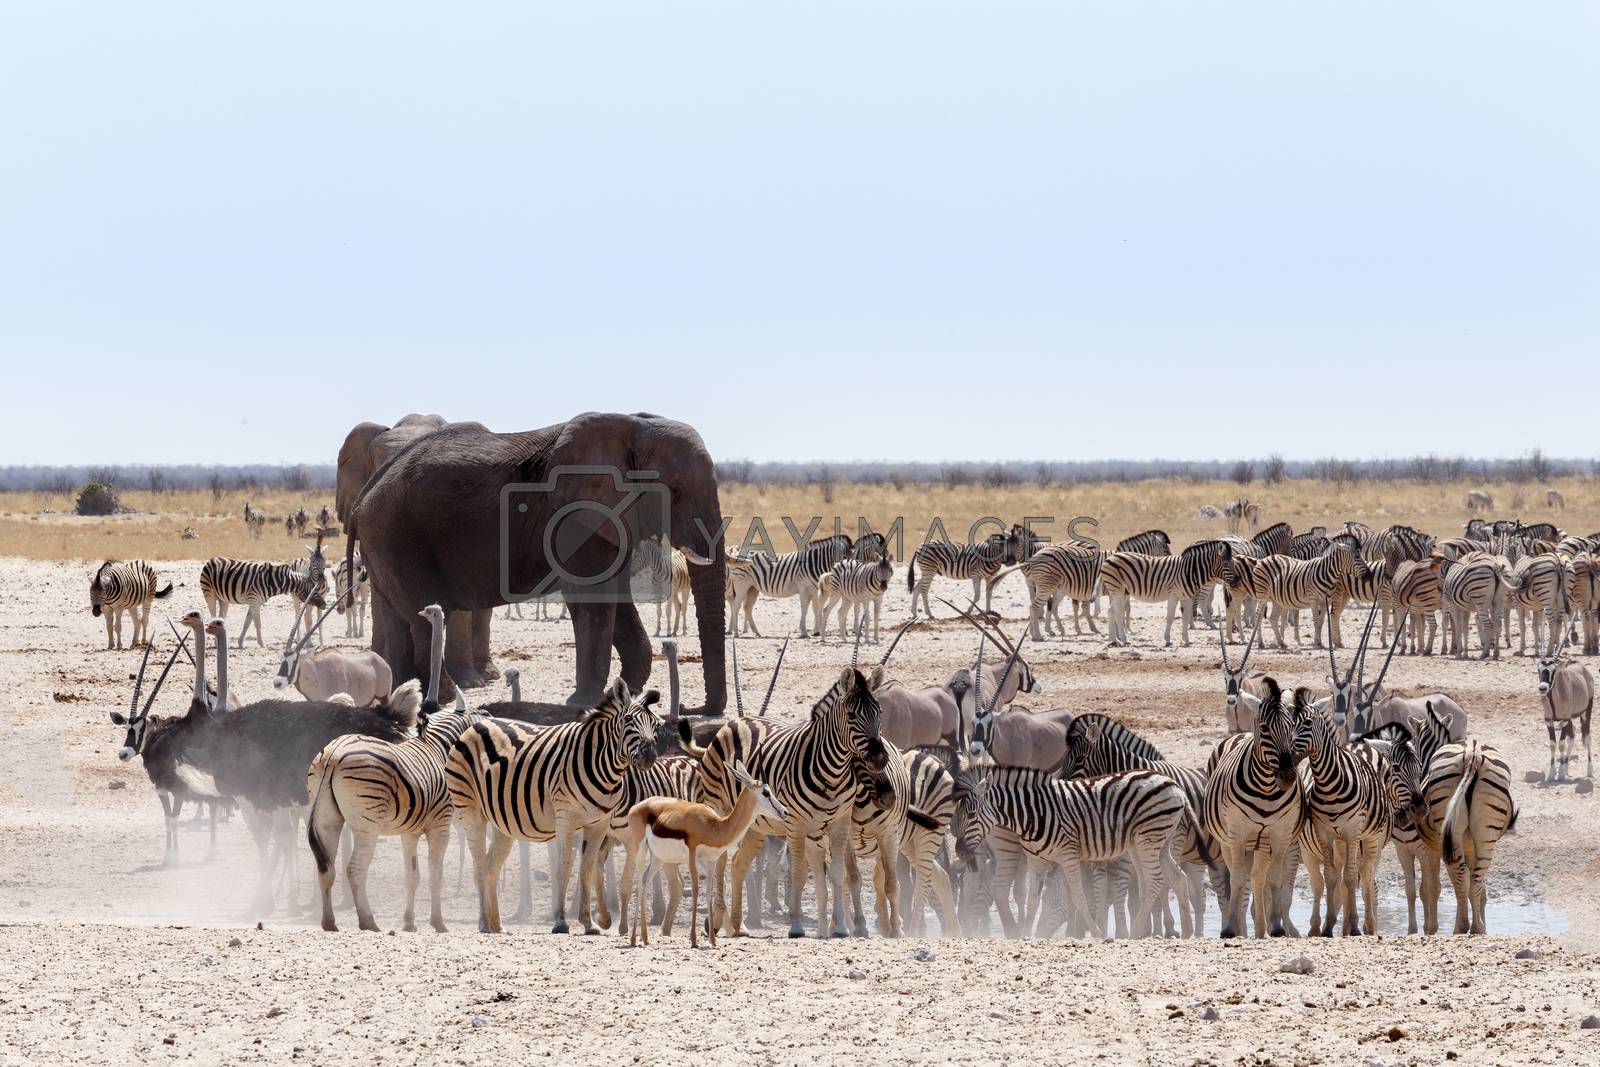 Royalty free image of crowded waterhole with Elephants, zebras, springbok and orix by artush